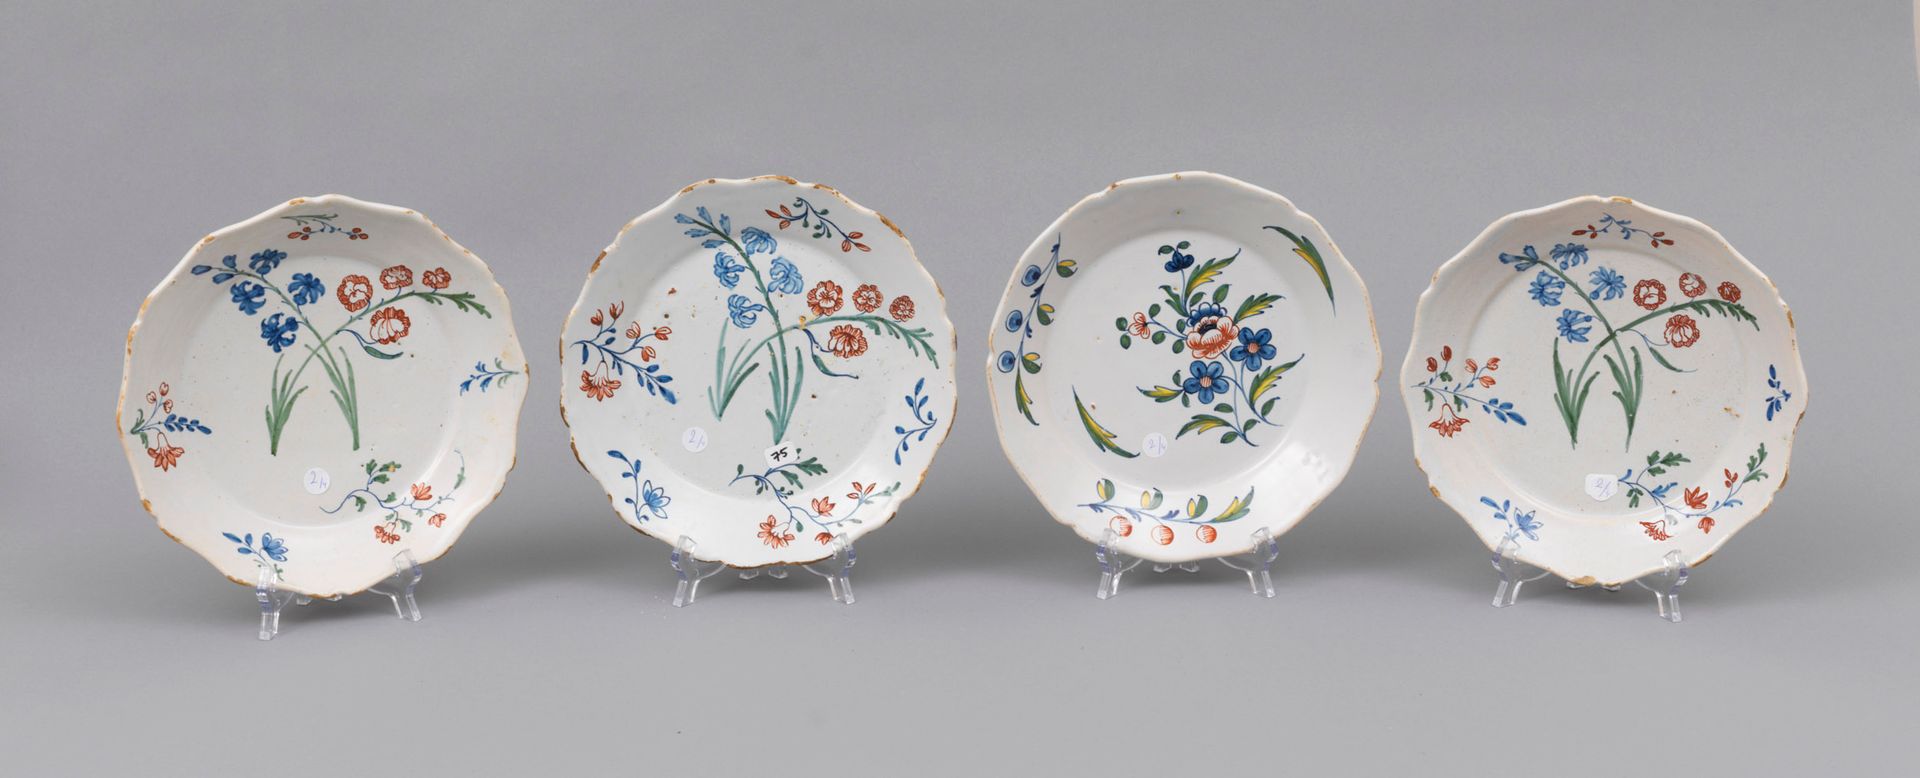 Faience Nevers 
Nevers_

Four earthenware plates with contoured edges with polyc&hellip;